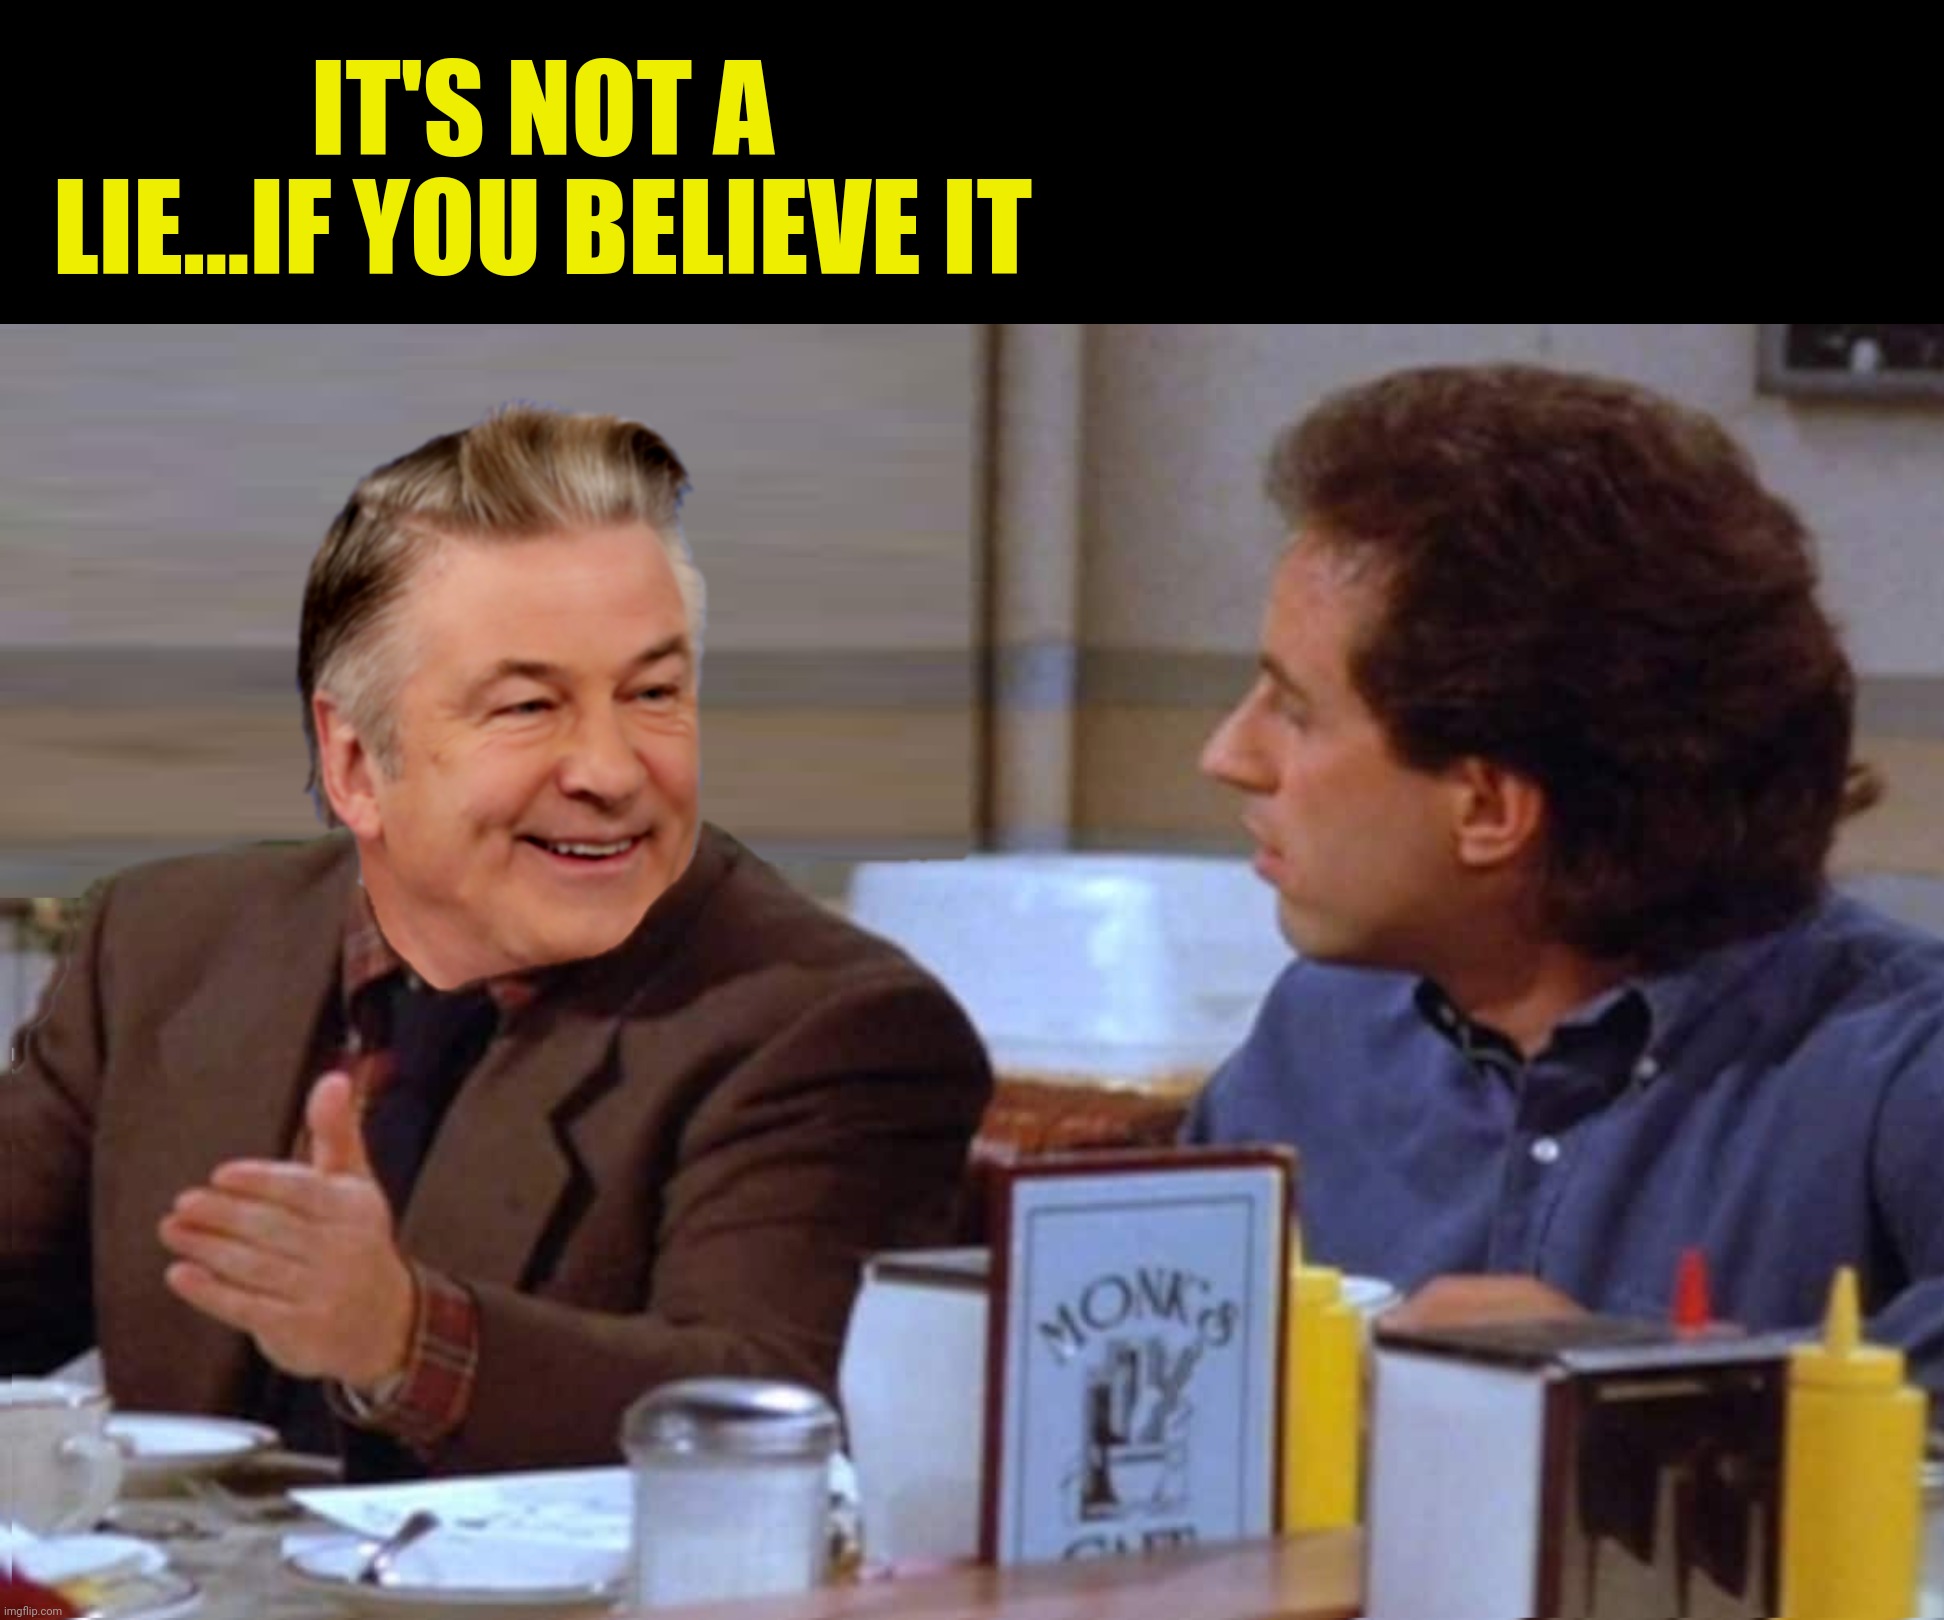 Half cocked | IT'S NOT A LIE...IF YOU BELIEVE IT | image tagged in bad photoshop,alec baldwin,seinfeld,george costanza,lie | made w/ Imgflip meme maker